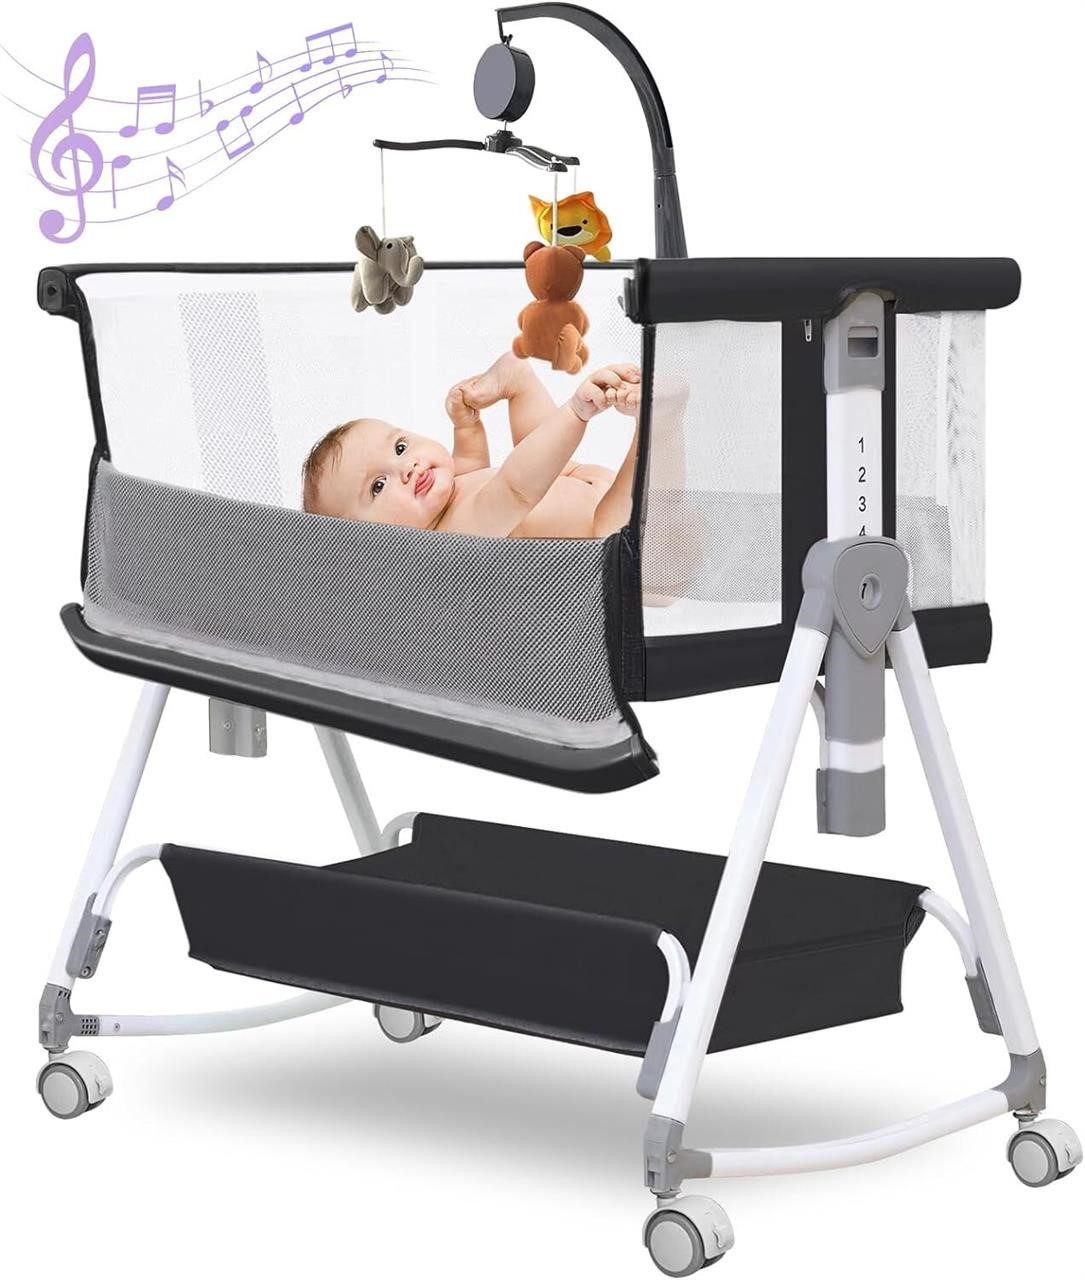 Hkleae 3 in 1 Baby Bassinet with Musical Toy